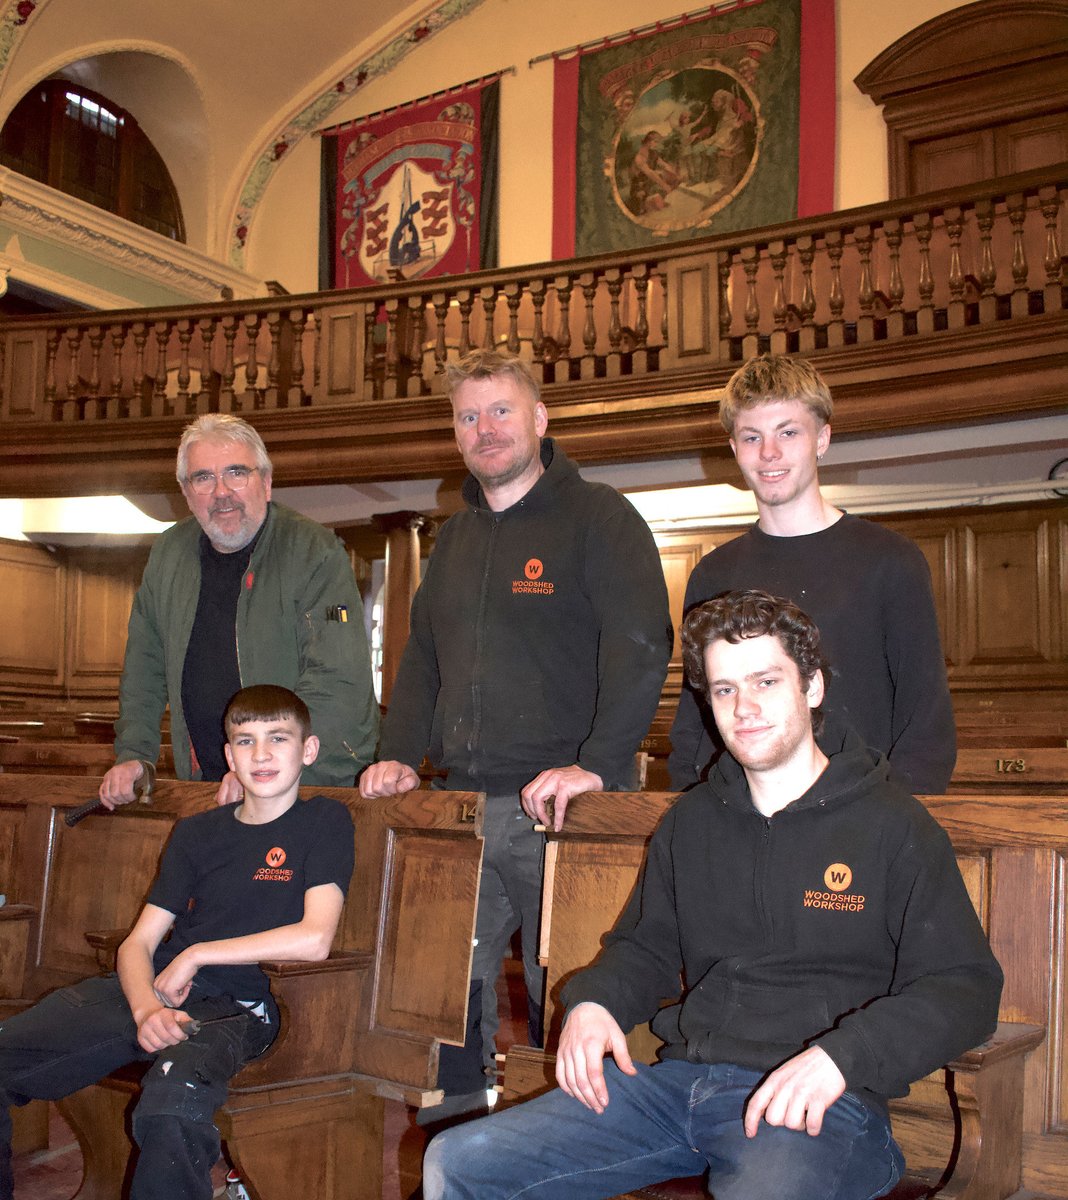 Local young people are getting hands on with their heritage as we begin the restoration of Redhills.

We are working with Sacriston’s @CicWoodshed to remove & restore the famous Pitman’s Parliament seats - a vital first stage in the project.

More: http://redhillsdurham.org/local-young-people-begin-renovation-of-redhills/ (1/5) 